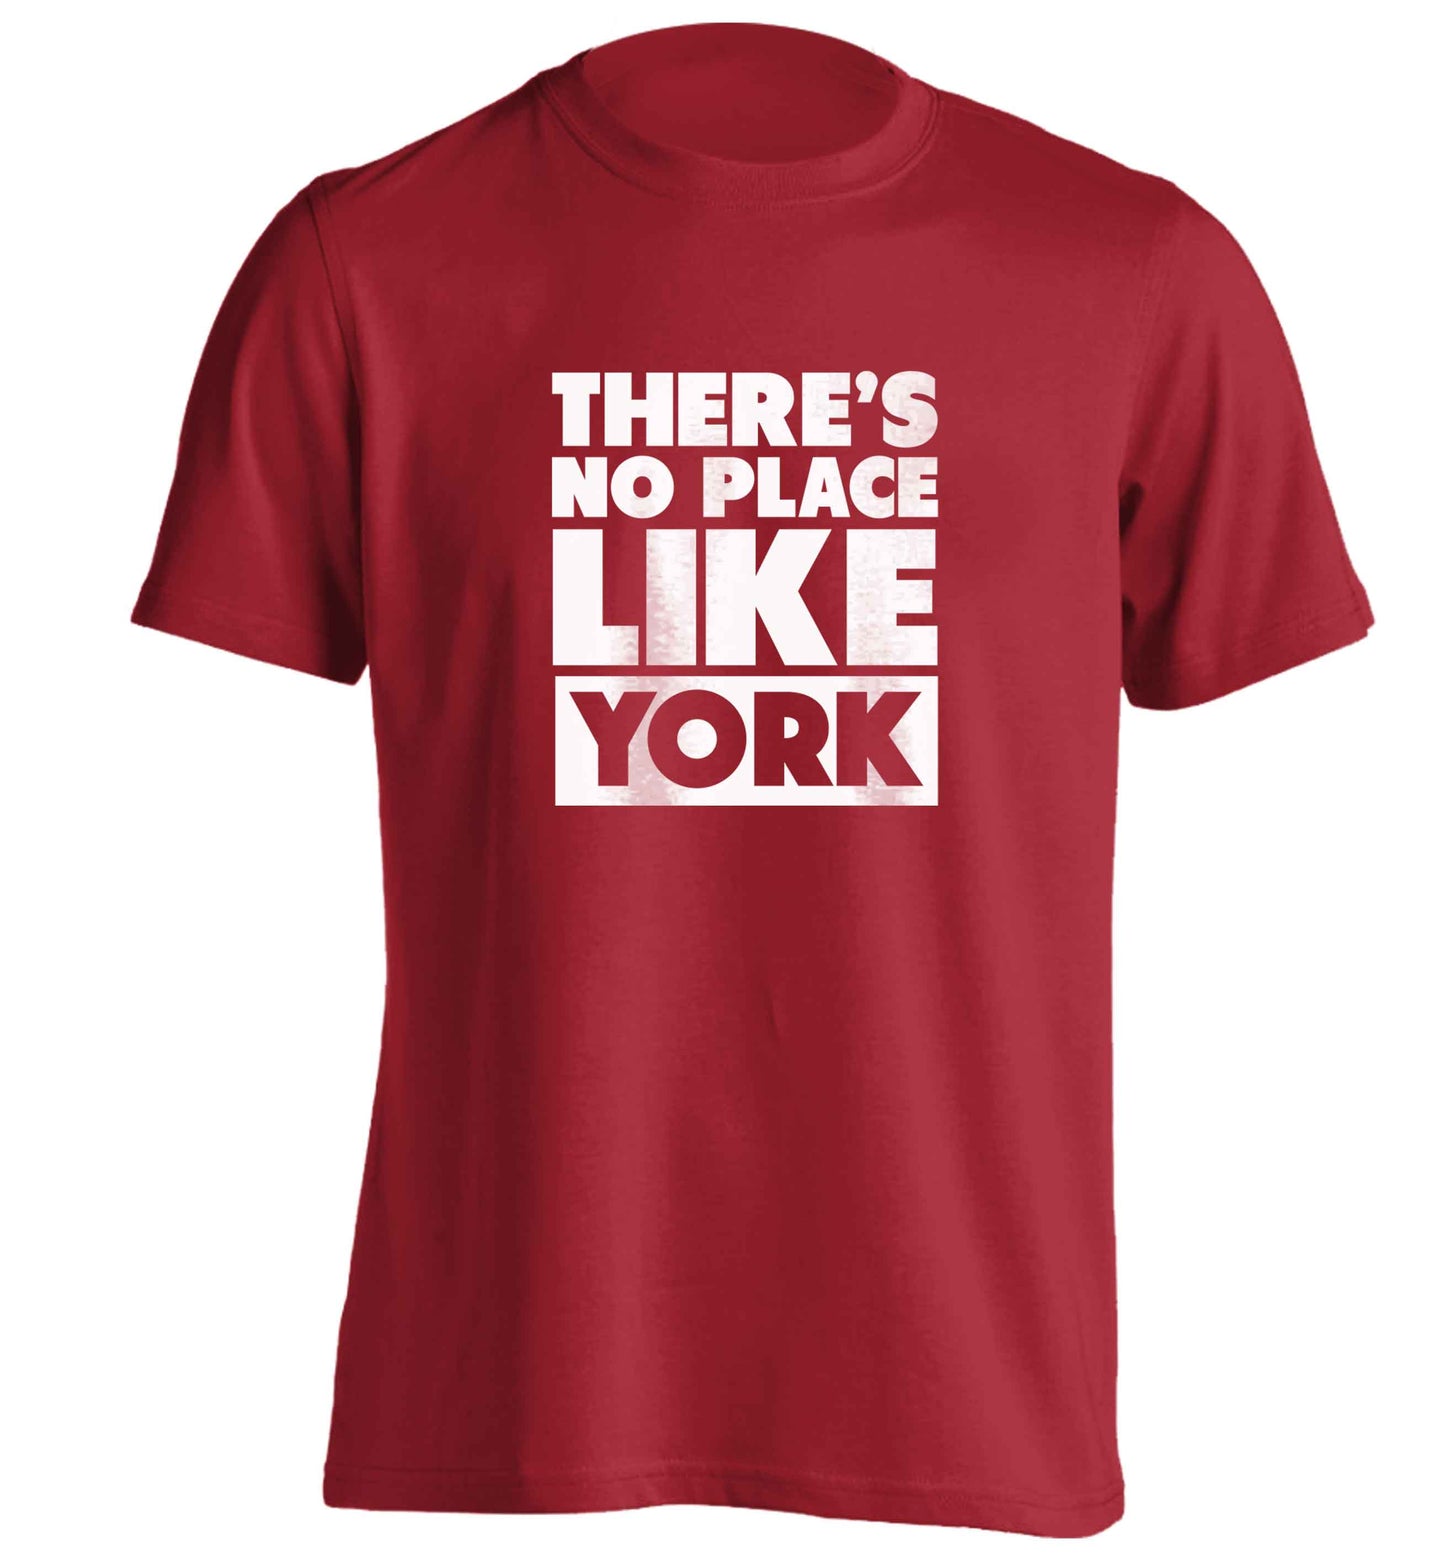 There's no place like york adults unisex red Tshirt 2XL